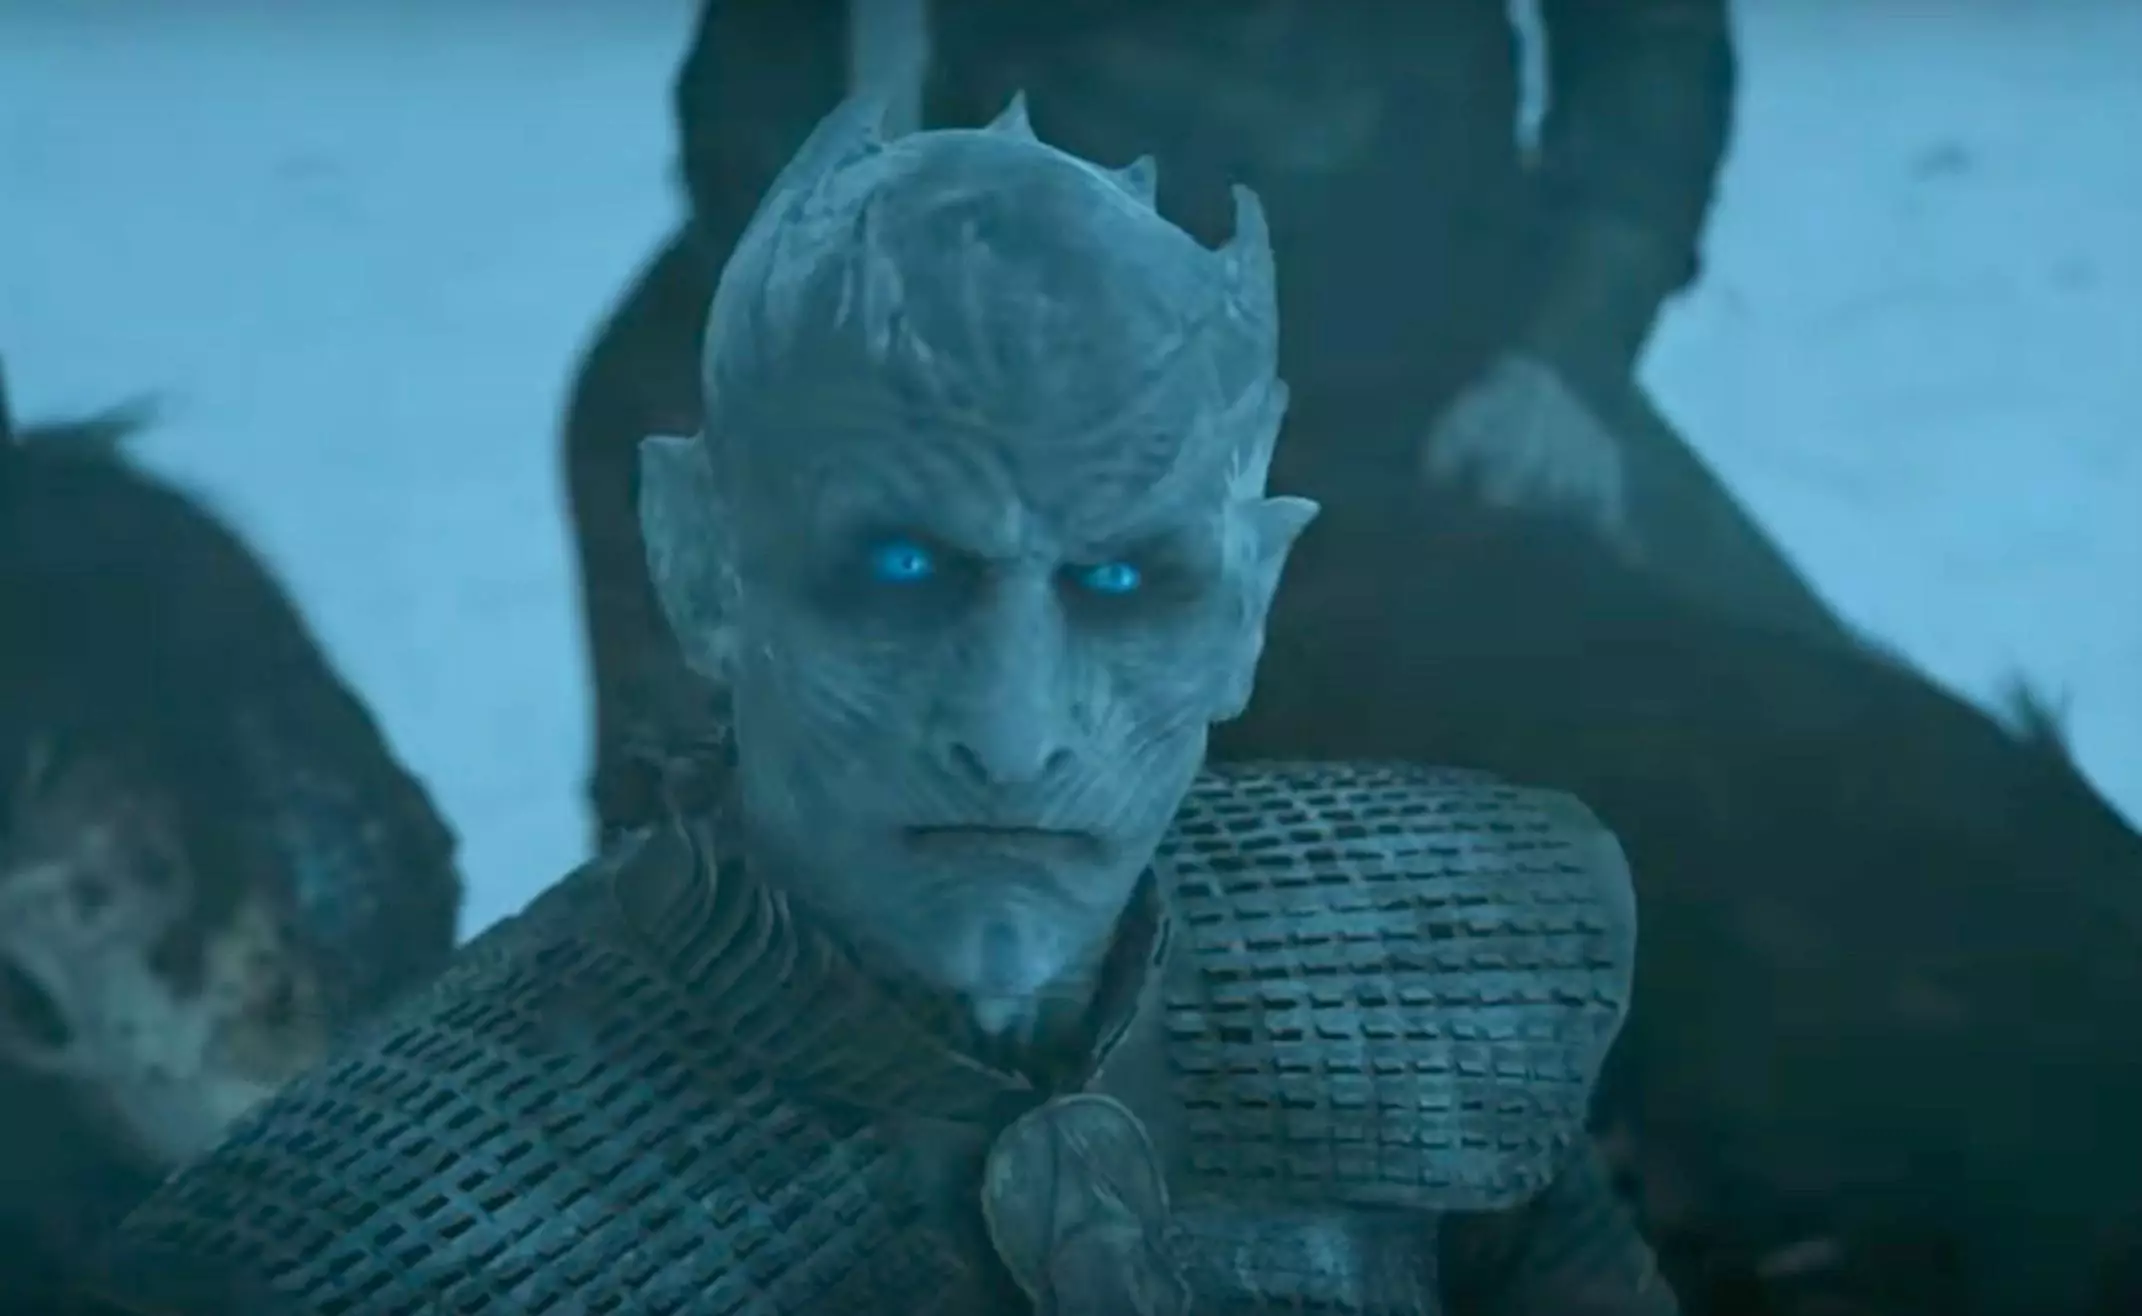 This happy character is the Night King.